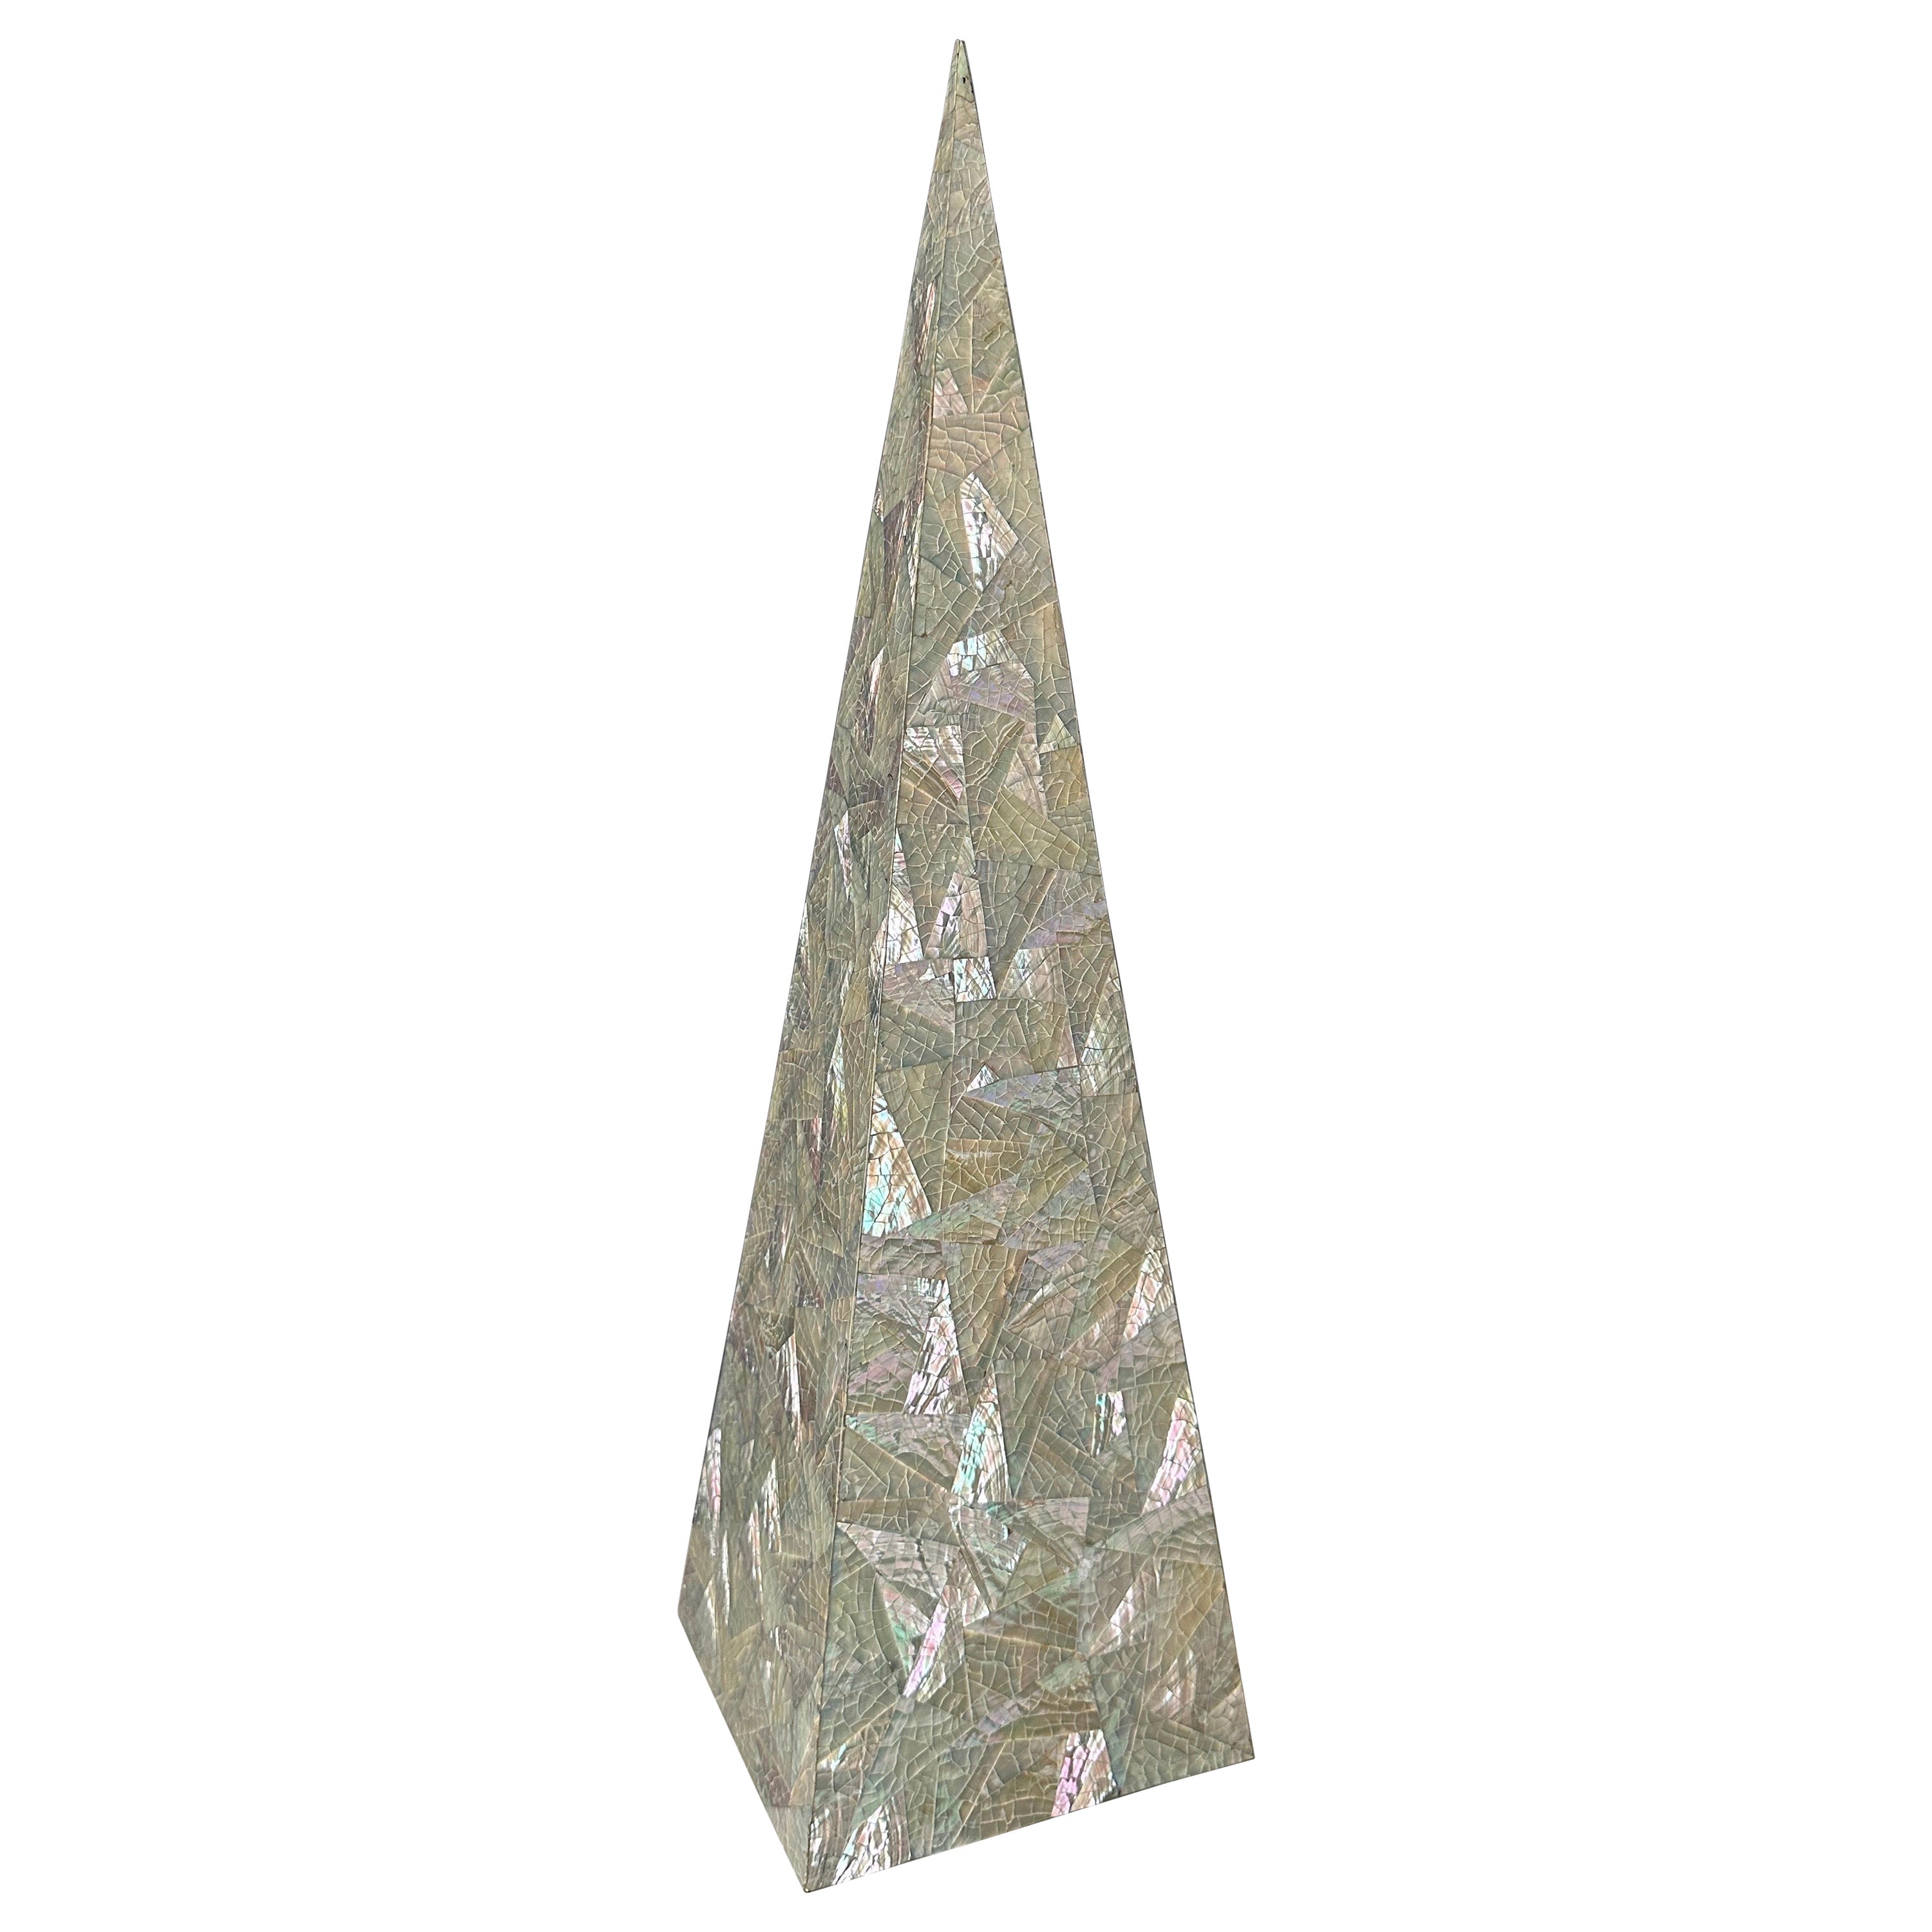 Tessellated Mother of Pearl Obelisk For Sale